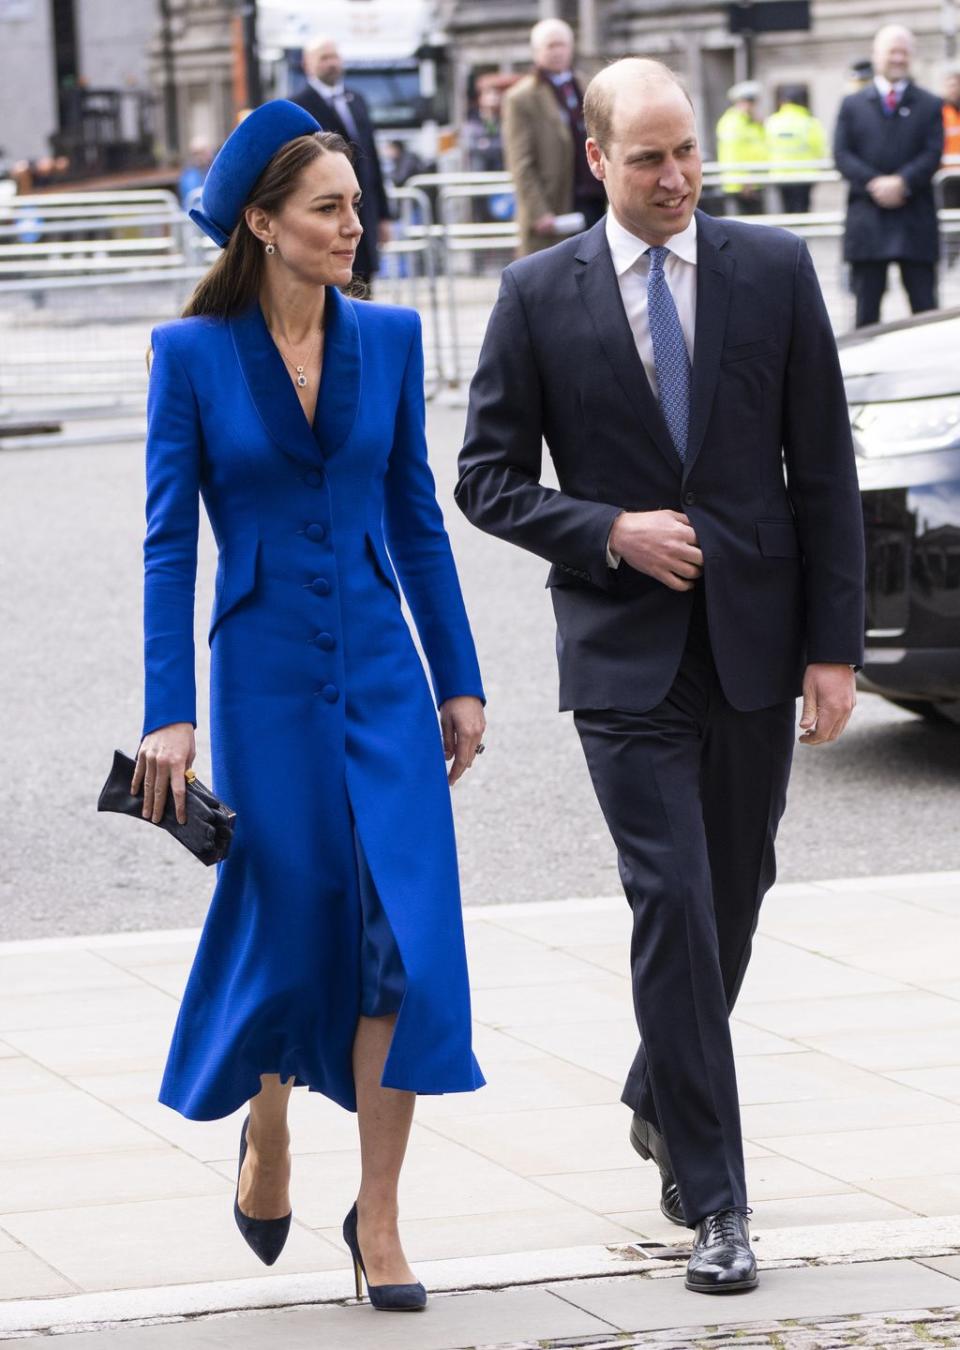 london, england march 14 prince william, duke of cambridge and catherine, duchess of cambridge attend the annual commonwealth service on commonwealth day at westminster abbey on march 14, 2022 in london, england photo by mark cuthbertuk press via getty images